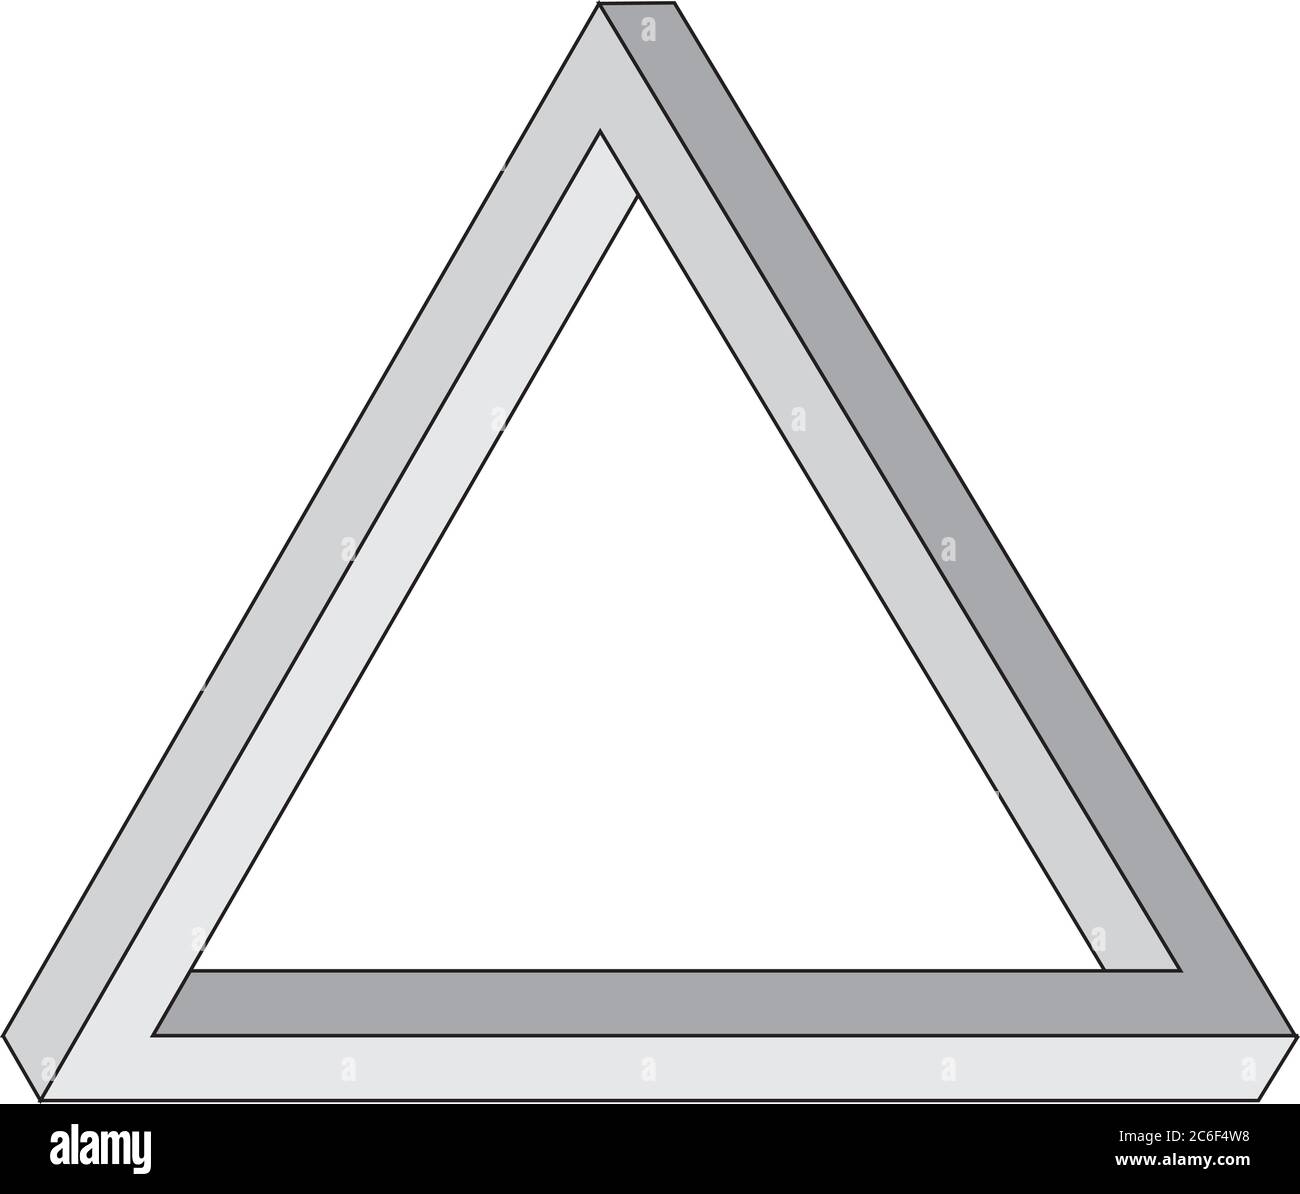 Illustration of The Penrose triangle, Penrose tribar, impossible tribar, an Impossible Triangle object in Grey devised in the 1950s by Lionel Penrose Stock Vector